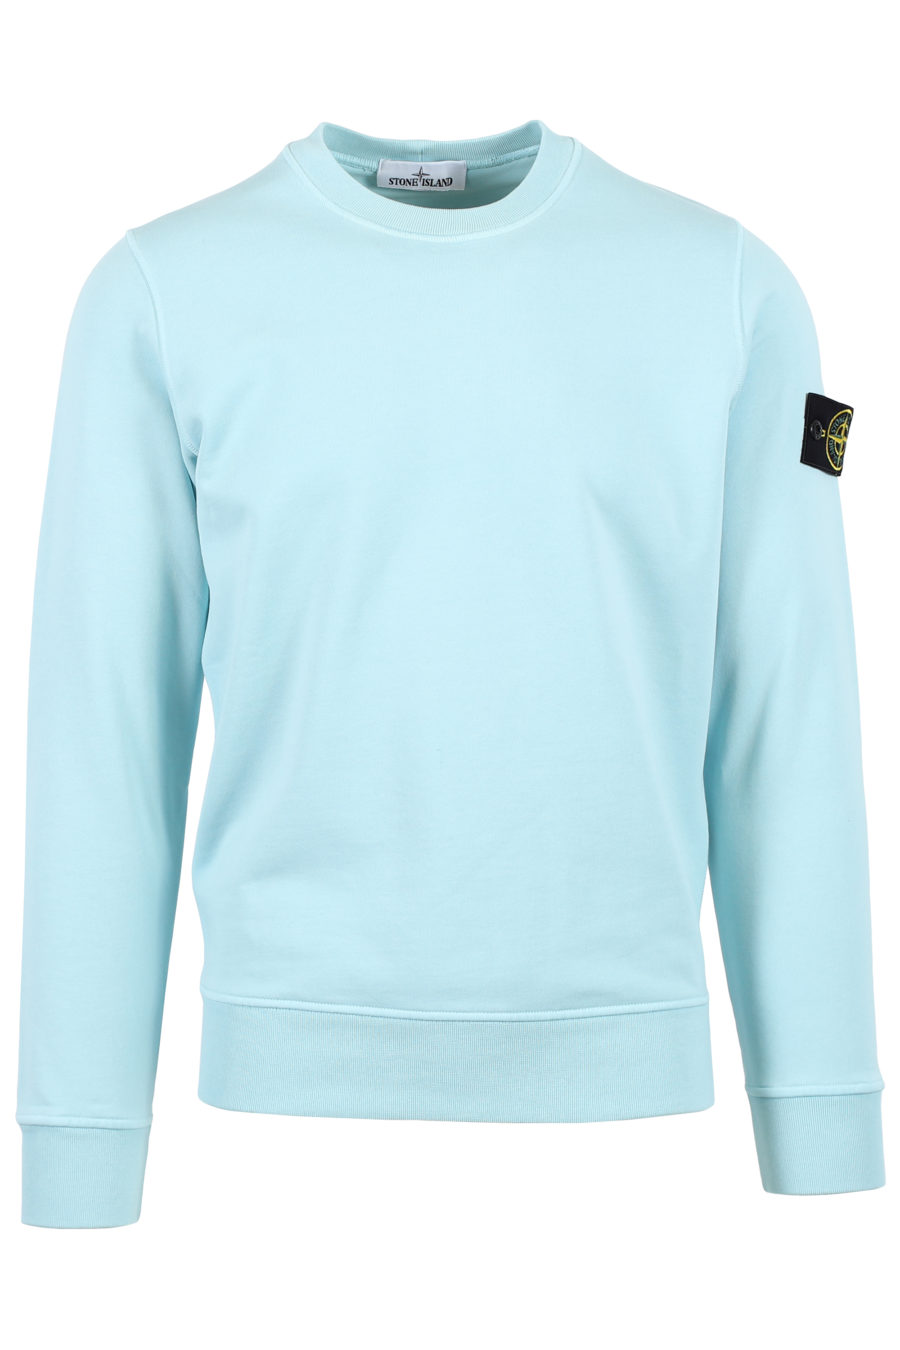 Blue sweatshirt with patch - IMG 3650